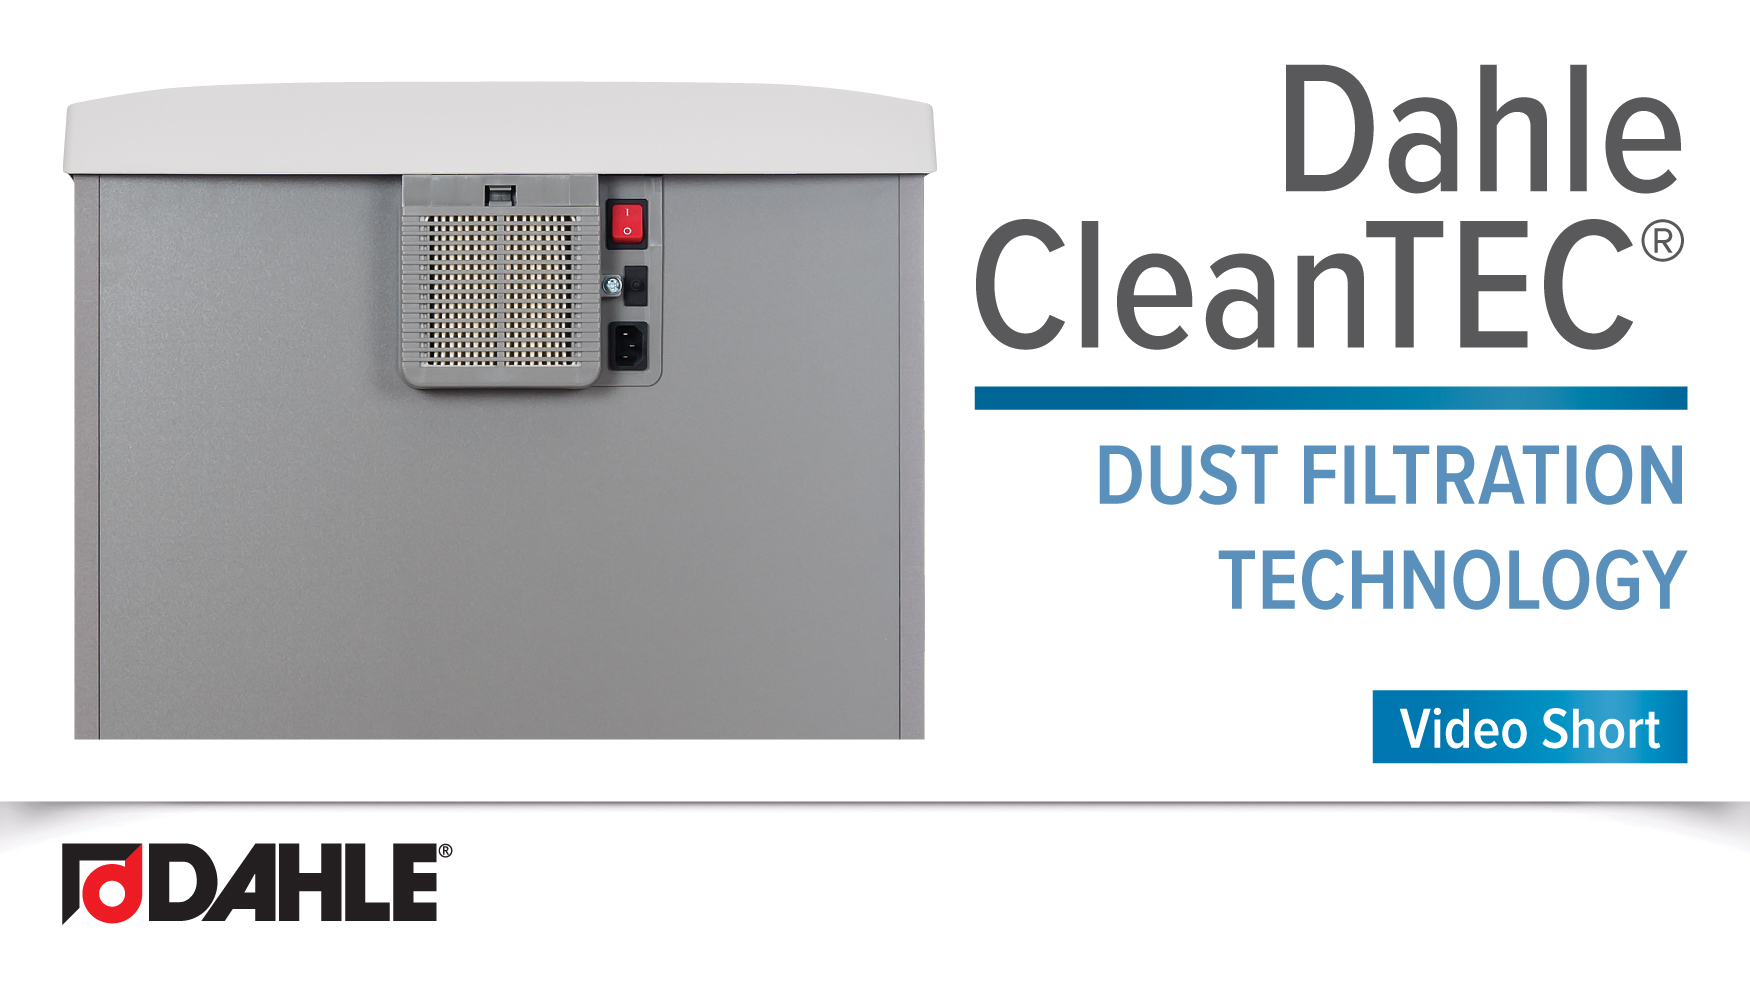 <big><strong>DAHLE CleanTEC® </strong></big><br>Benefits of Filtration